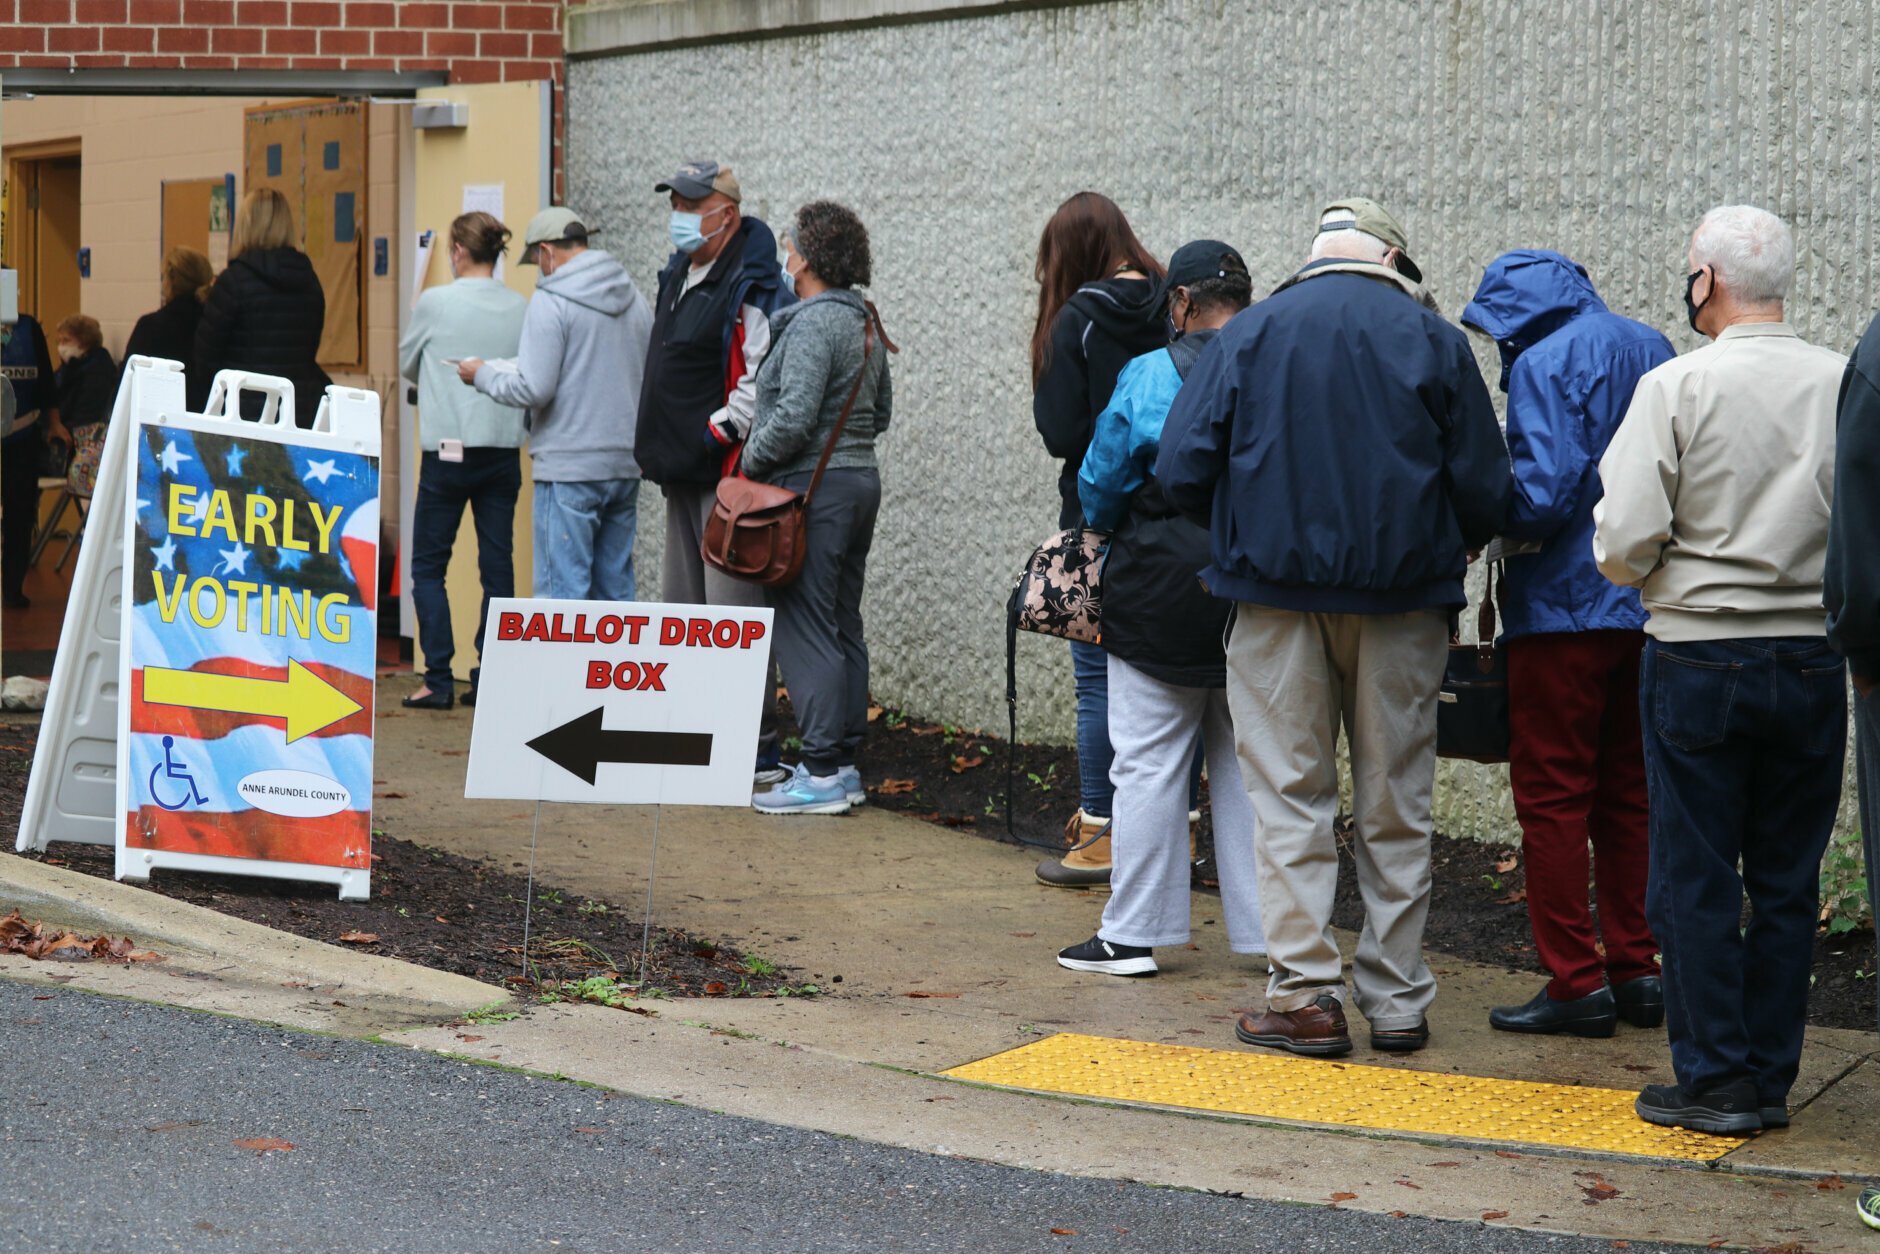 Voters wait in line to enter the Pip Moyer Recreation Center, Monday, Oct. 26, 2020 in Annapolis, Md., on the first day of in-person early voting in the state. (AP Photo/Brian Witte)